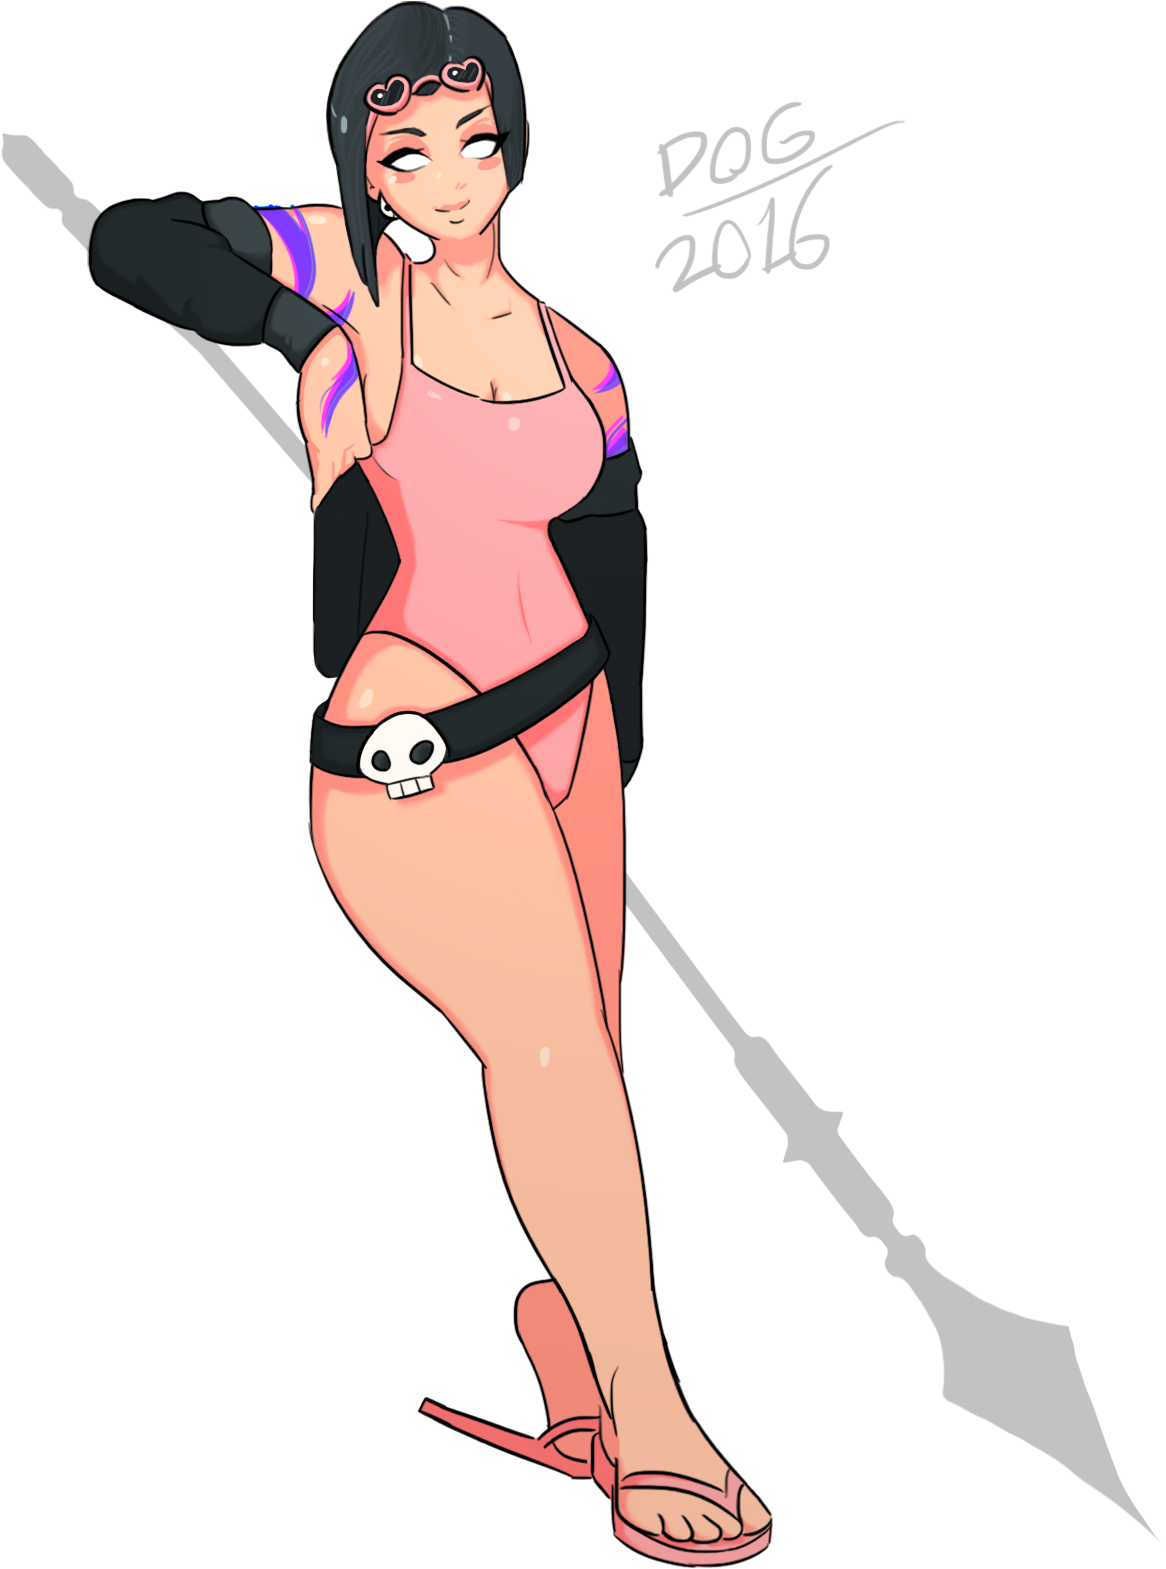 A Cartoon Of A Woman In A Pink Bathing Suit